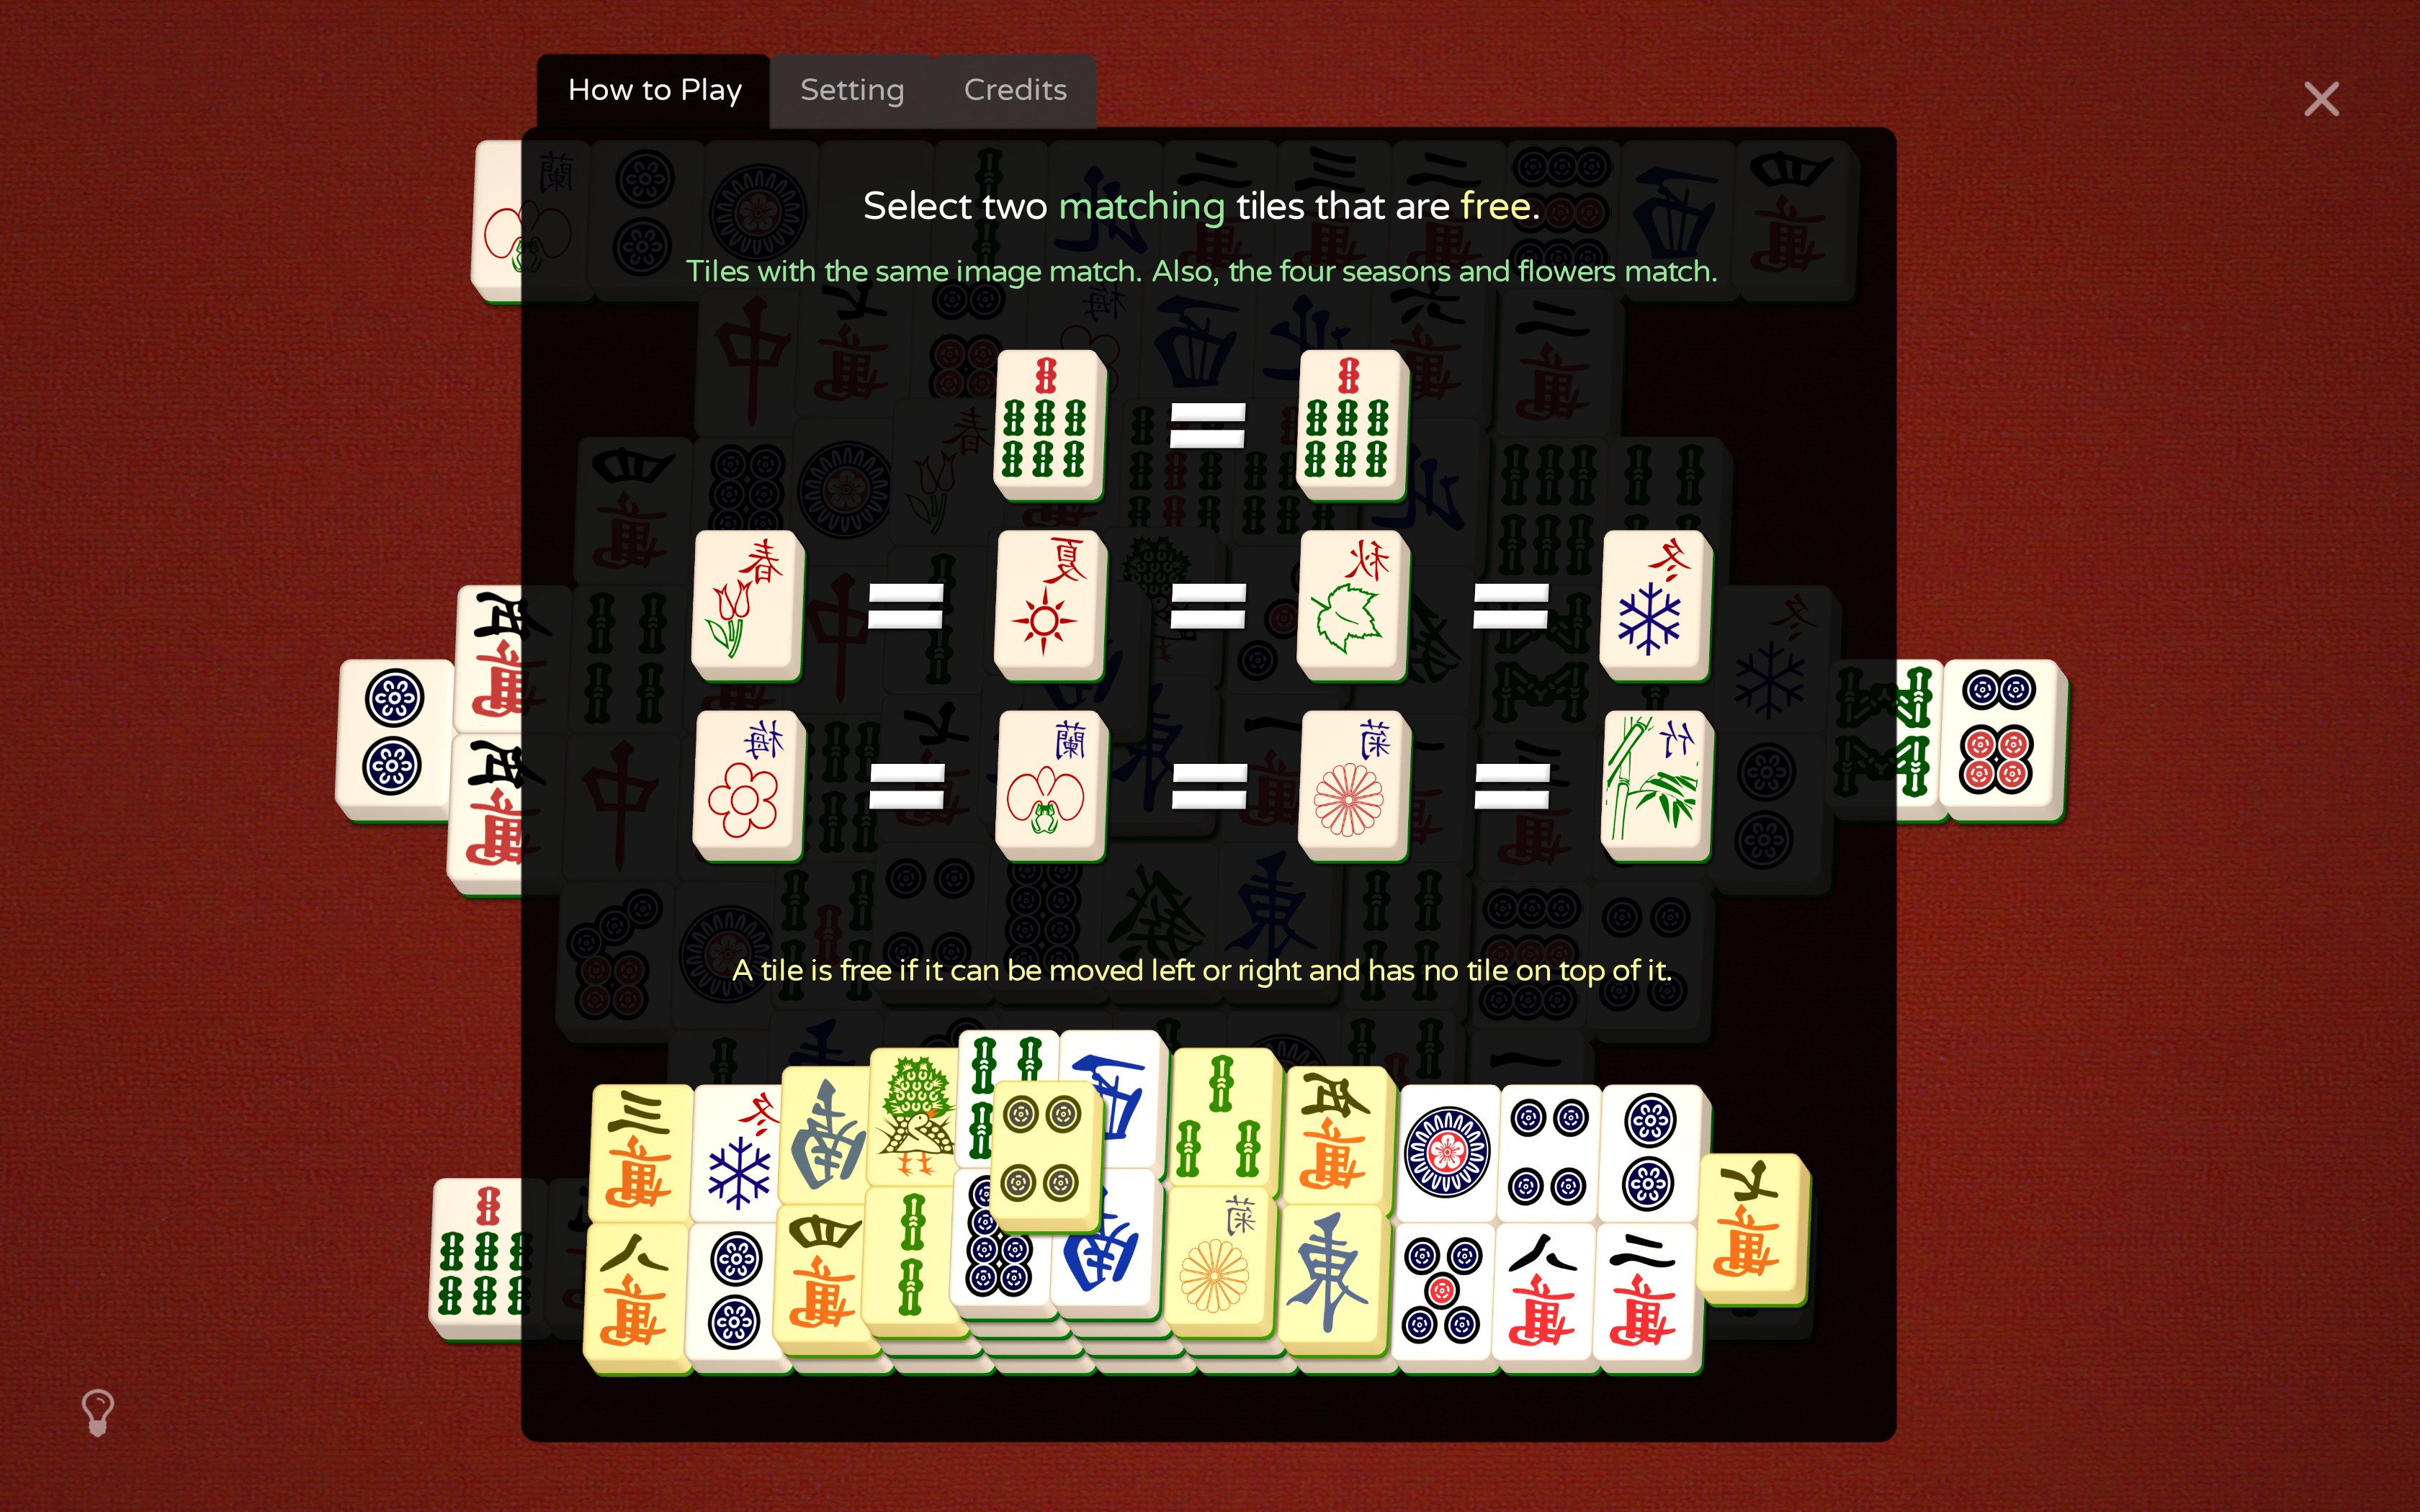 download the last version for ios Mahjong Epic